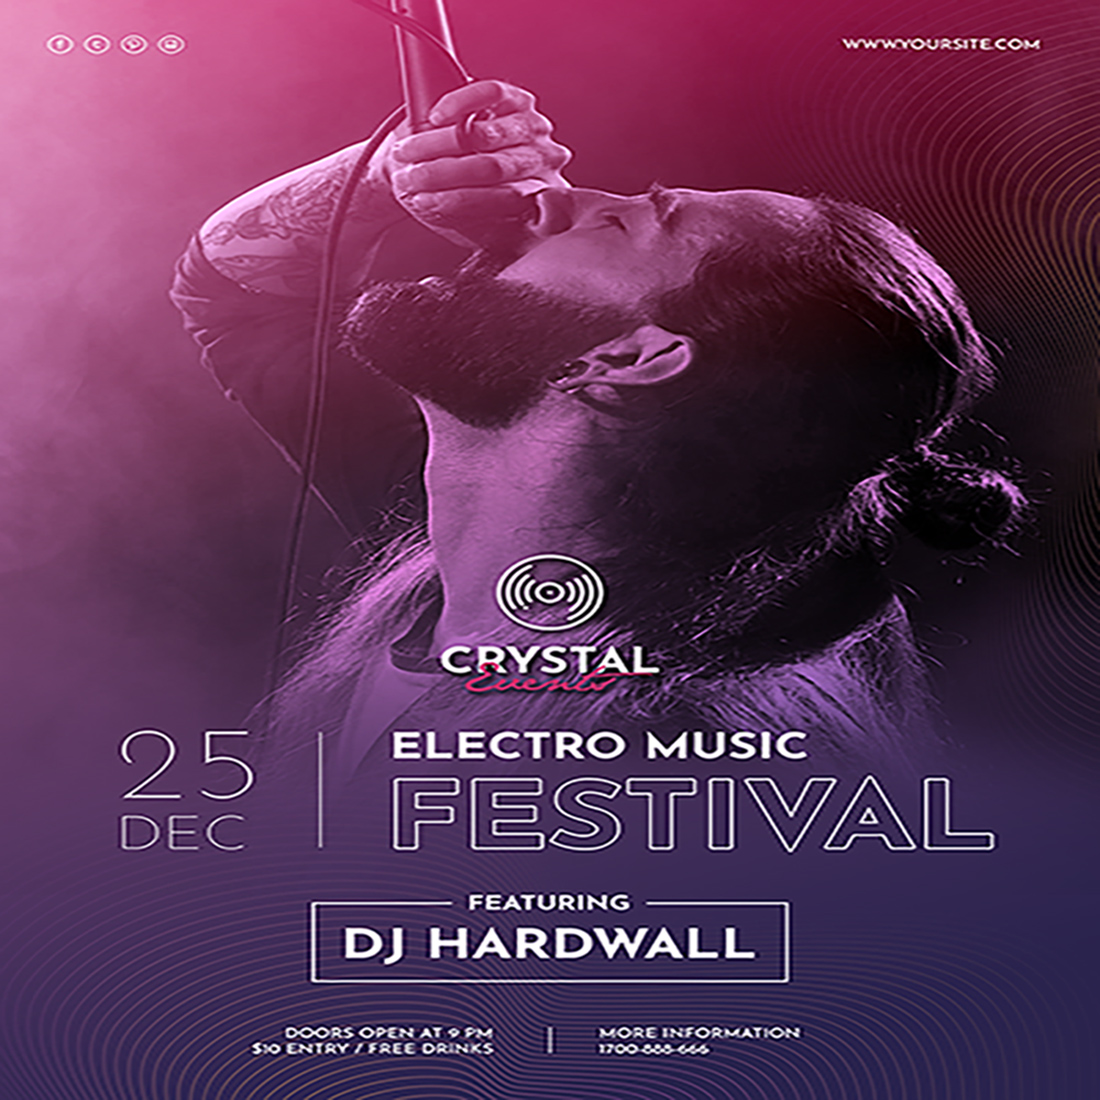 Electro-Music-Festival-Poster-Template cover image.